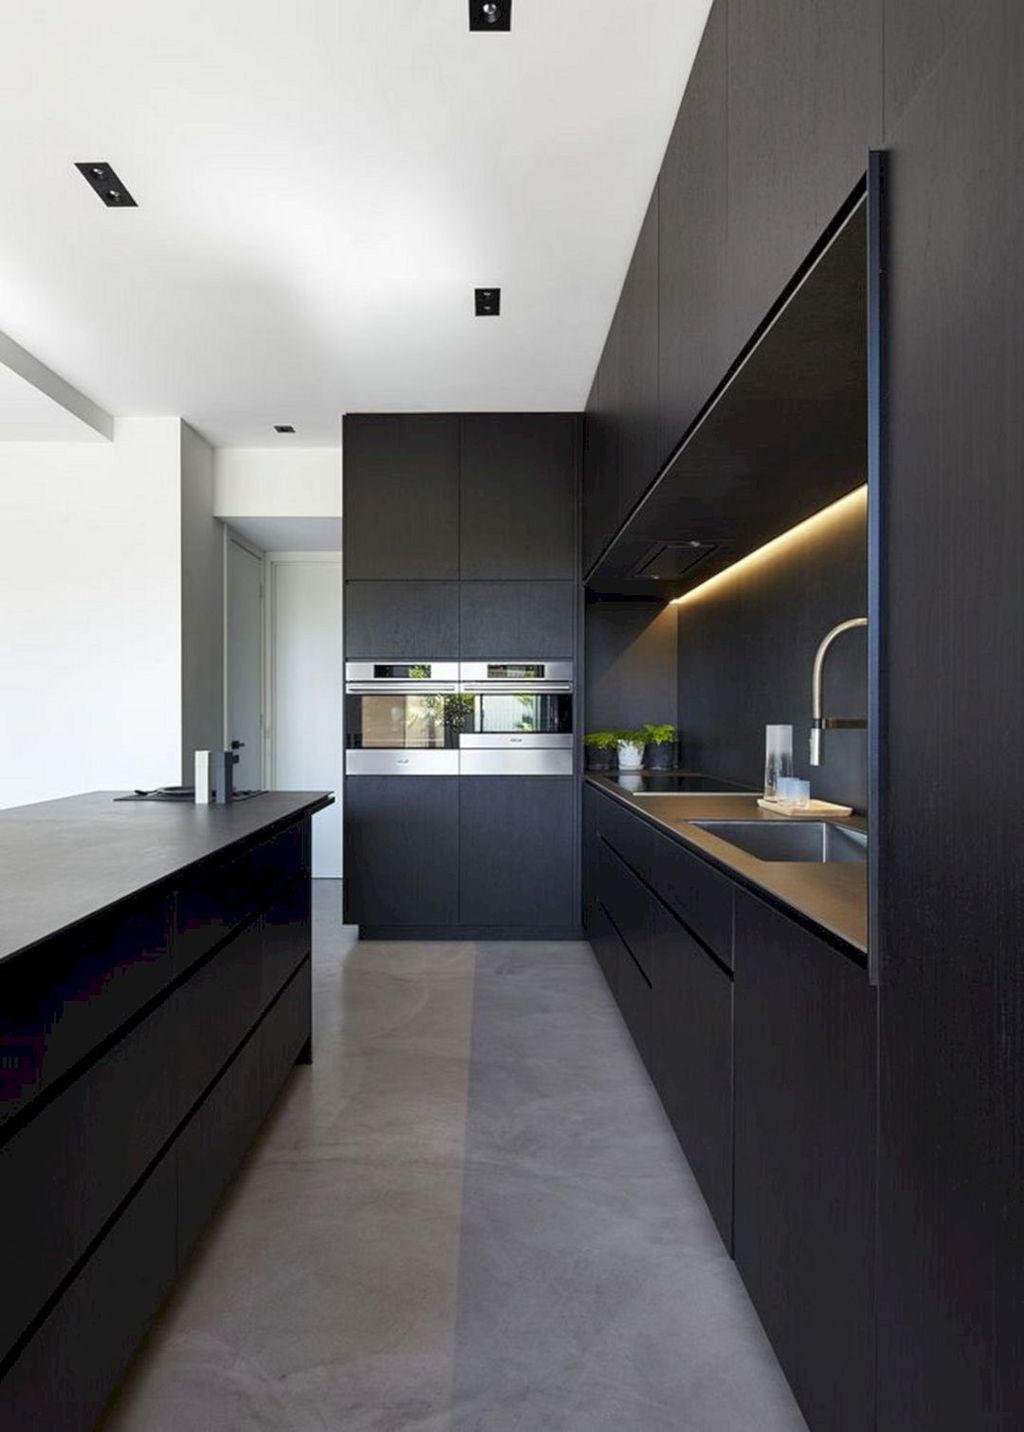 Elegant Minimalist Kitchen Design Ideas For Small Space To Try 16